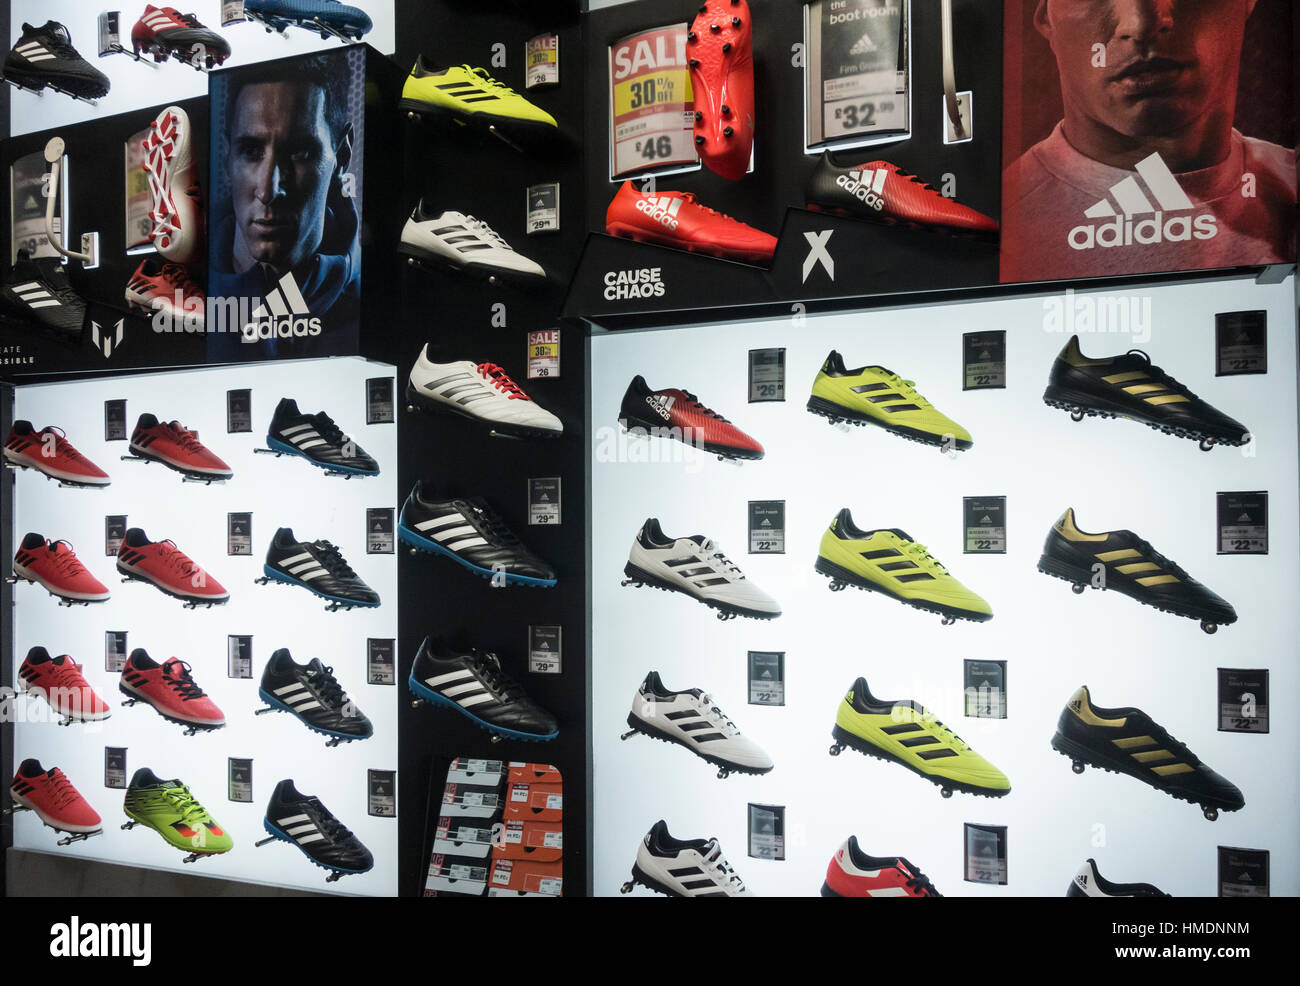 Adidas football boots in UK store Stock 